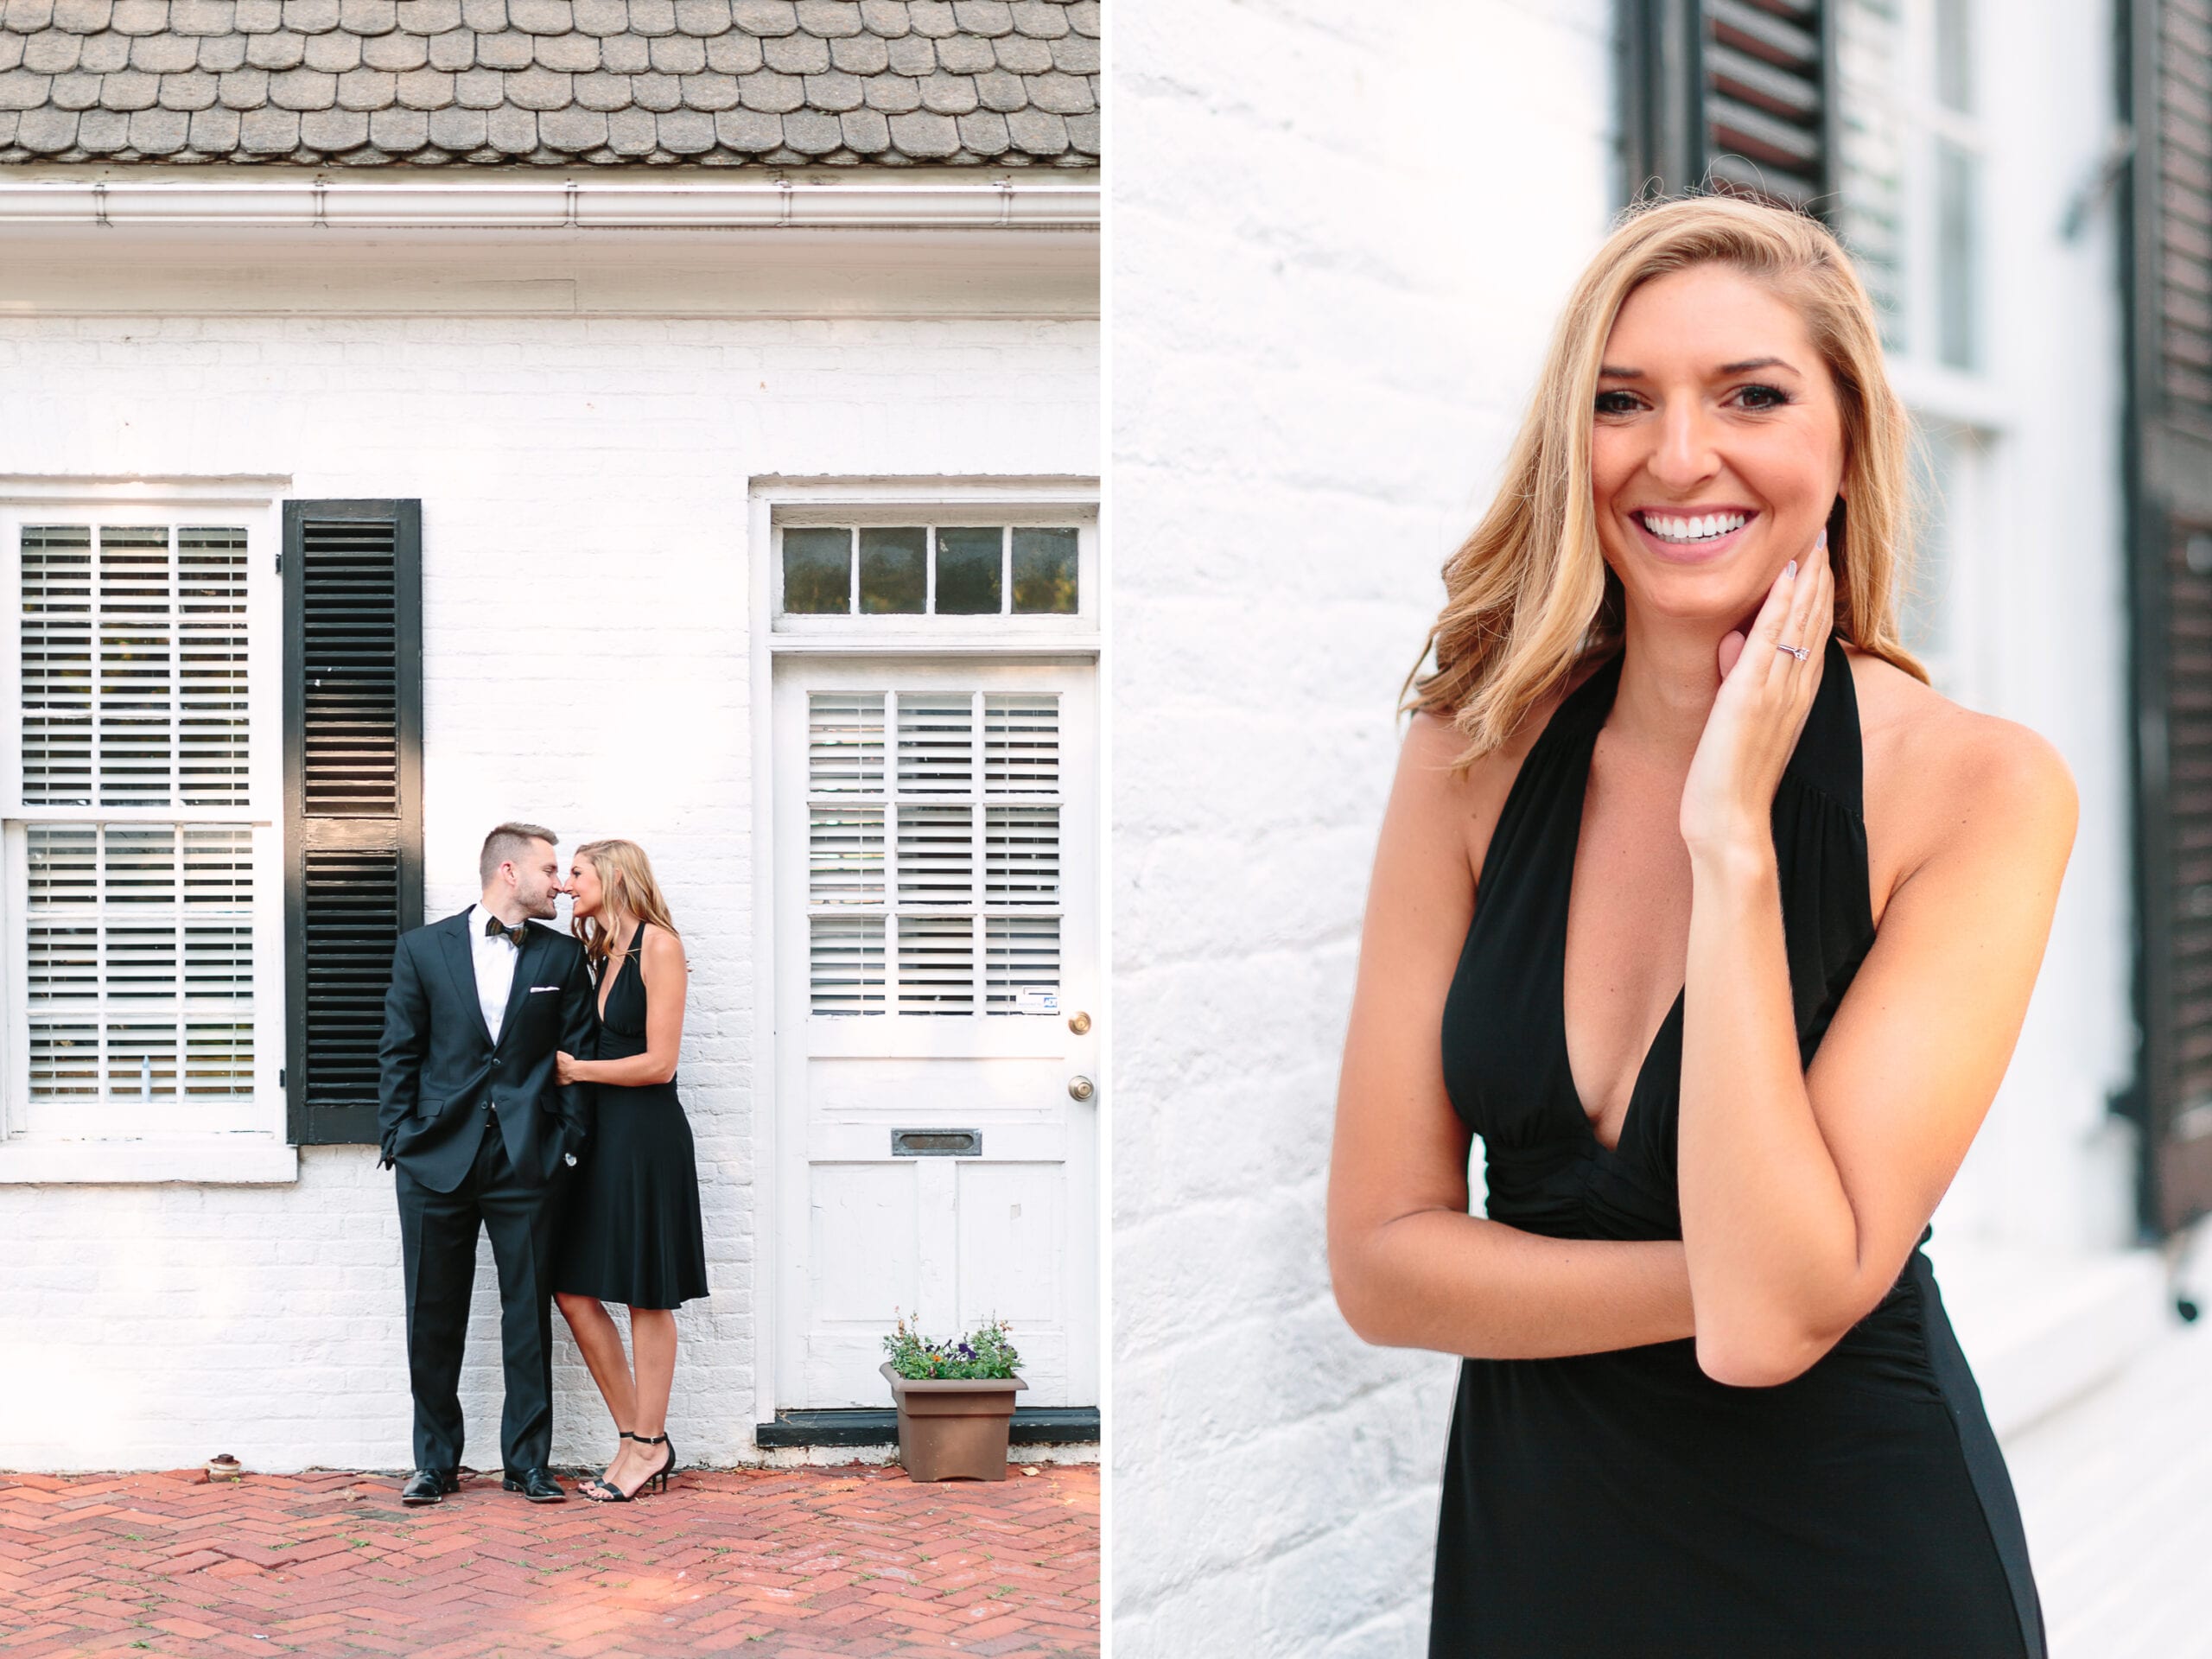 NYE Inspired Engagement Session at Downtown Frederick by Lauren Myers Photography #NYEWedding #Engaged #engagement #shesaidyes #huffpostido #thatsdarling #soloverly #theknot #thedailywedding #engagementsession #howheasked #proposal